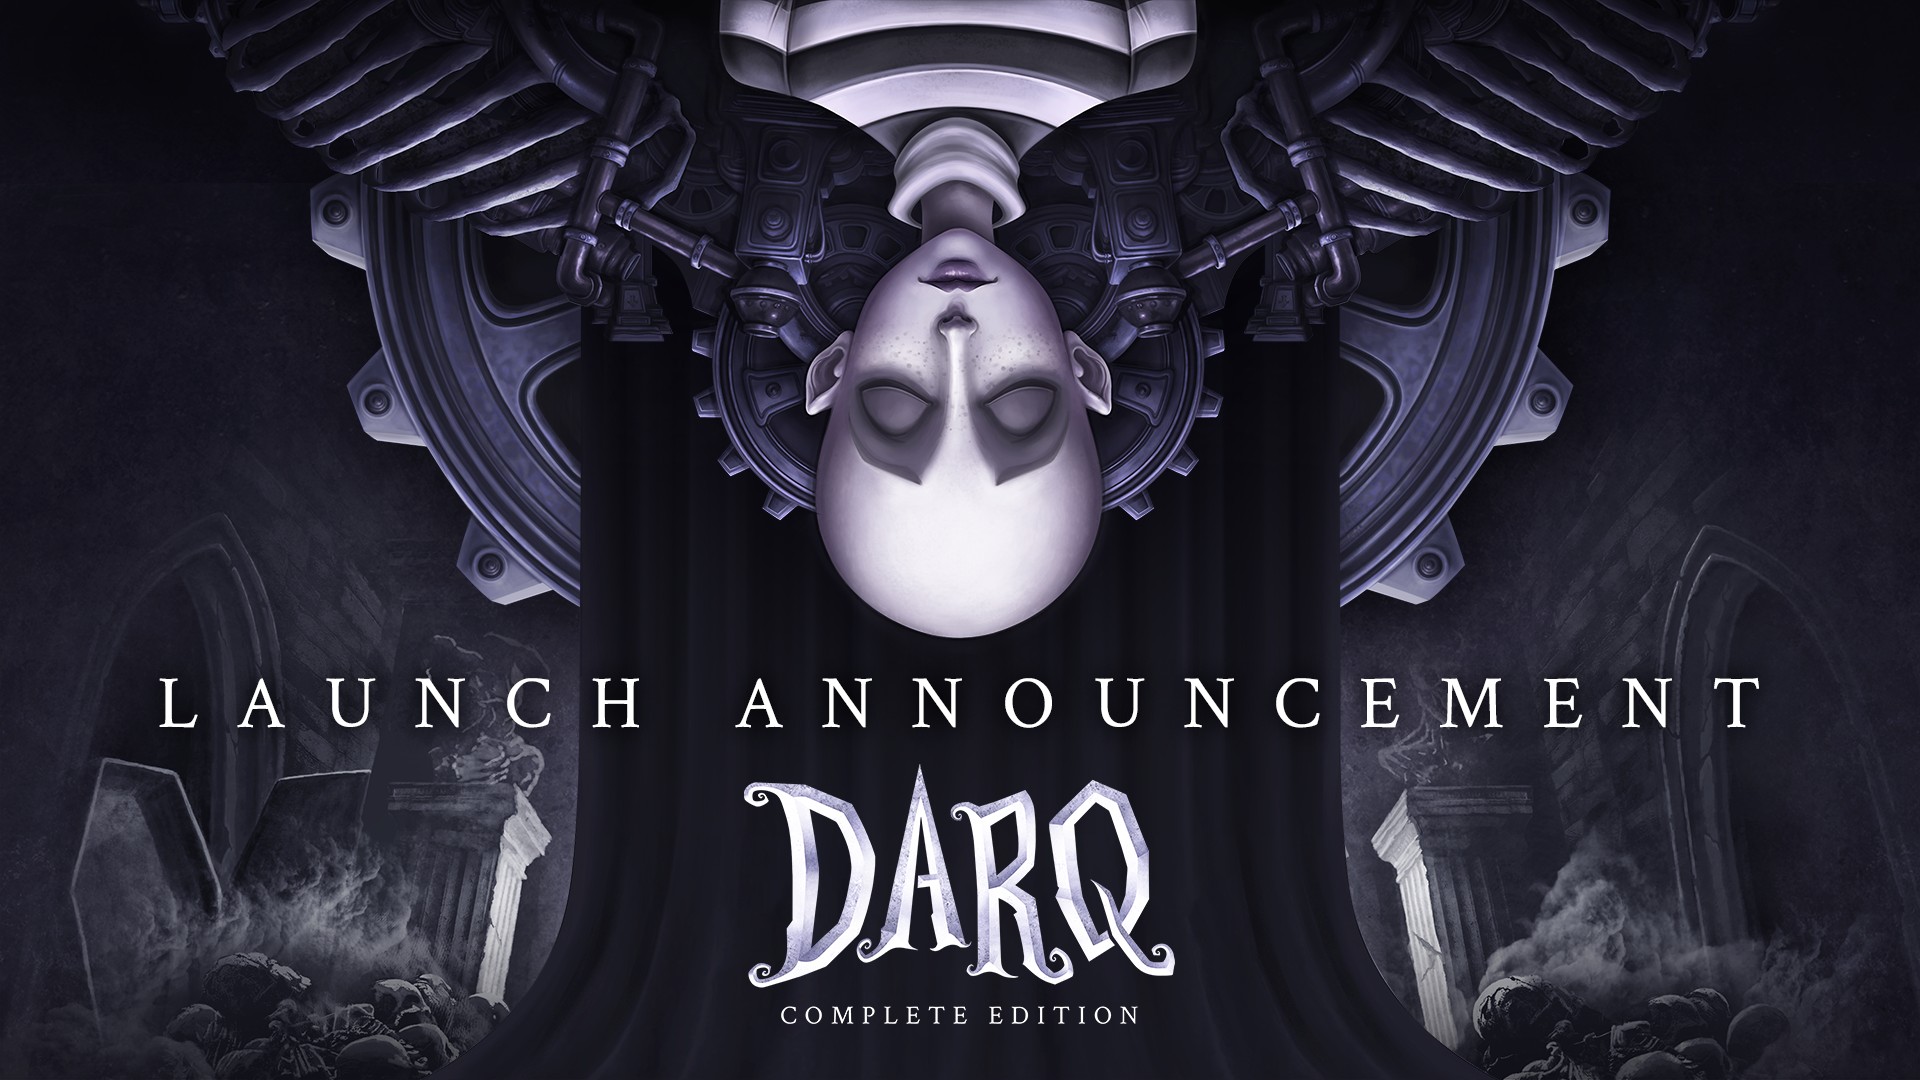 Video For Darq Coming Soon to Xbox One with Free Upgrade to Xbox Series X|S in Early 2021